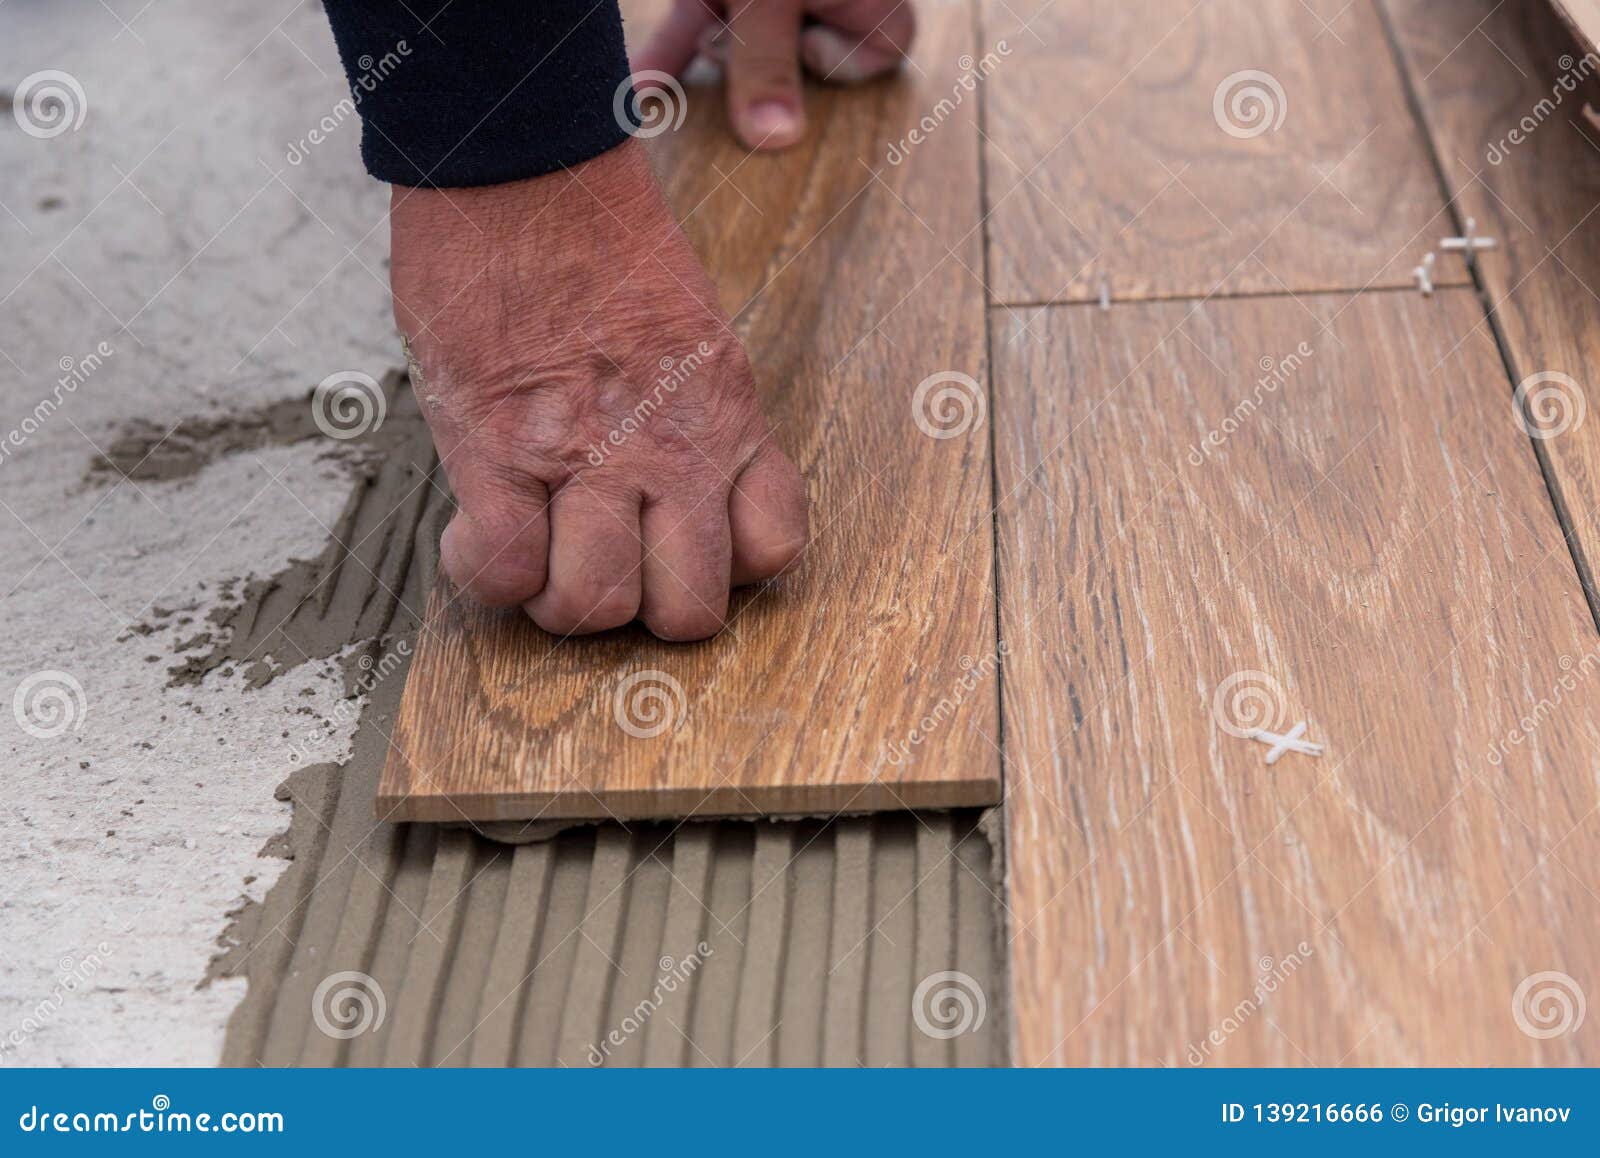 Worker Placing Ceramic Floor Tiles On Adhesive Surface Leveling